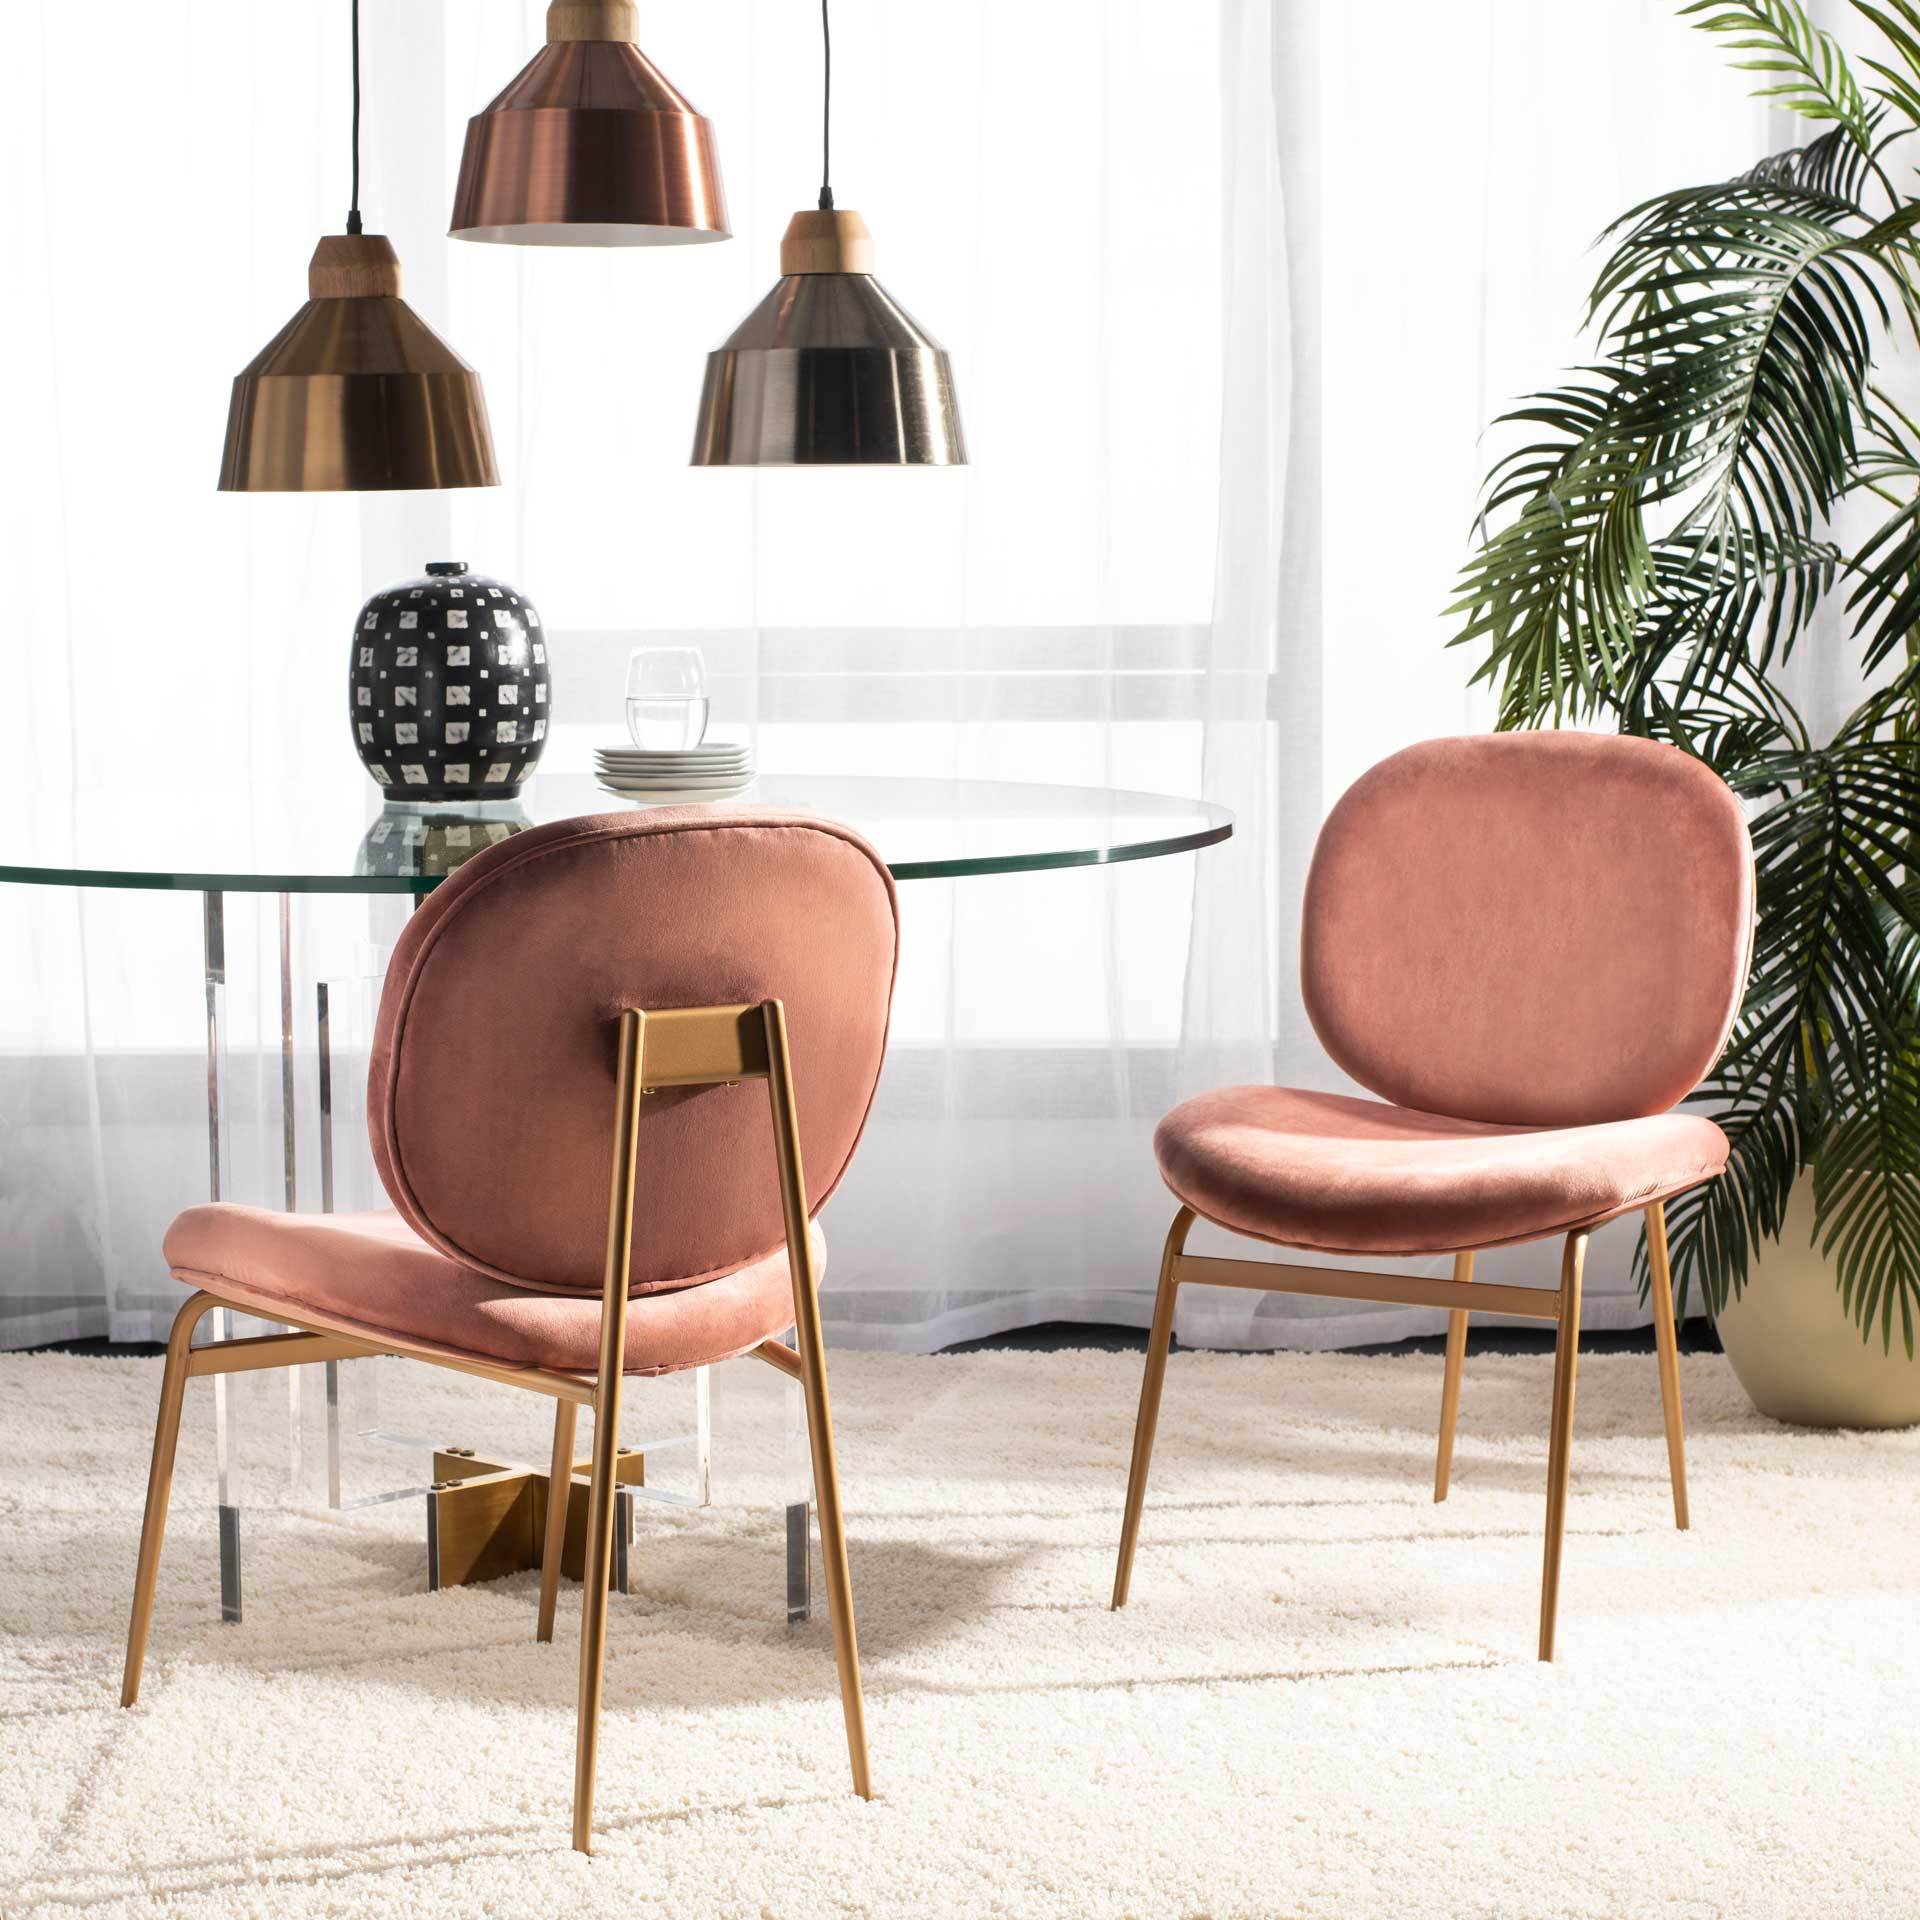 Jorden Round Side Chair Dusty Rose/Gold (Set of 2)